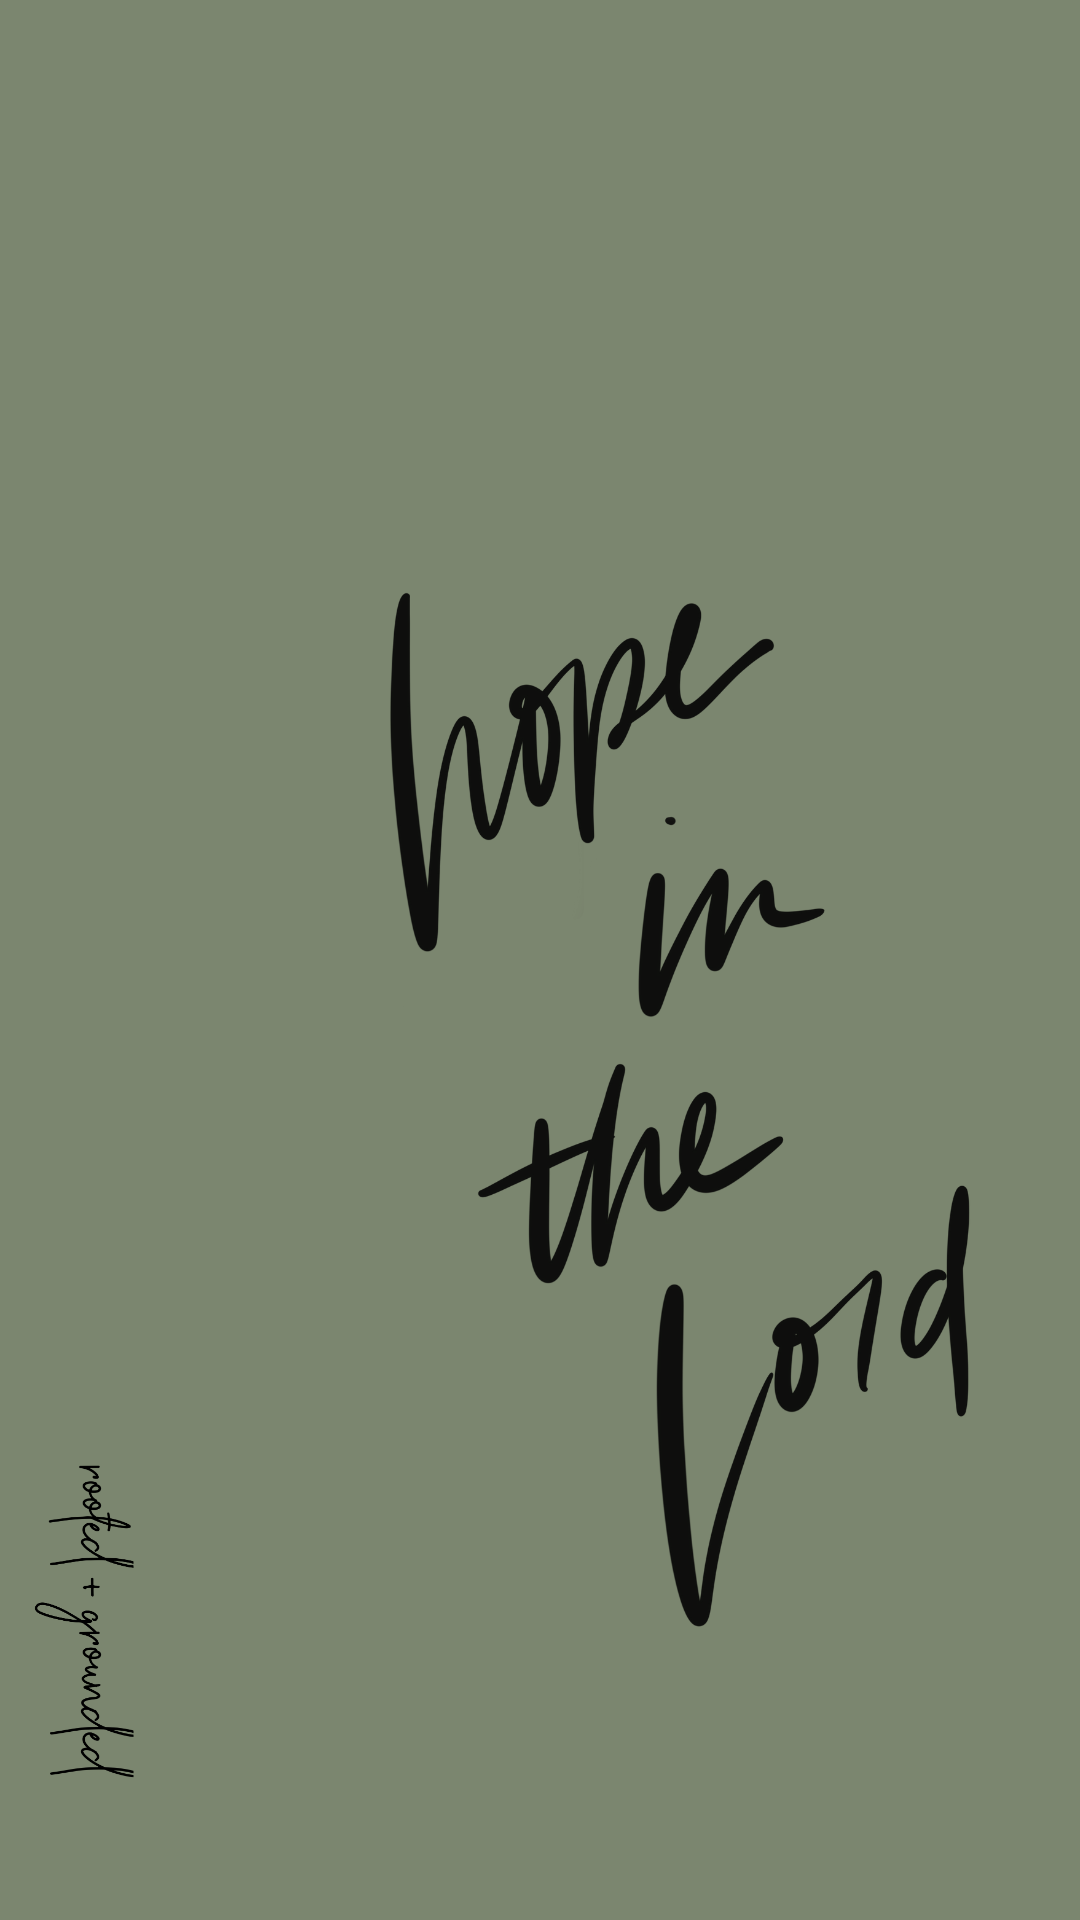 Christian iPhone Wallpaper. Free Downloads + Grounded